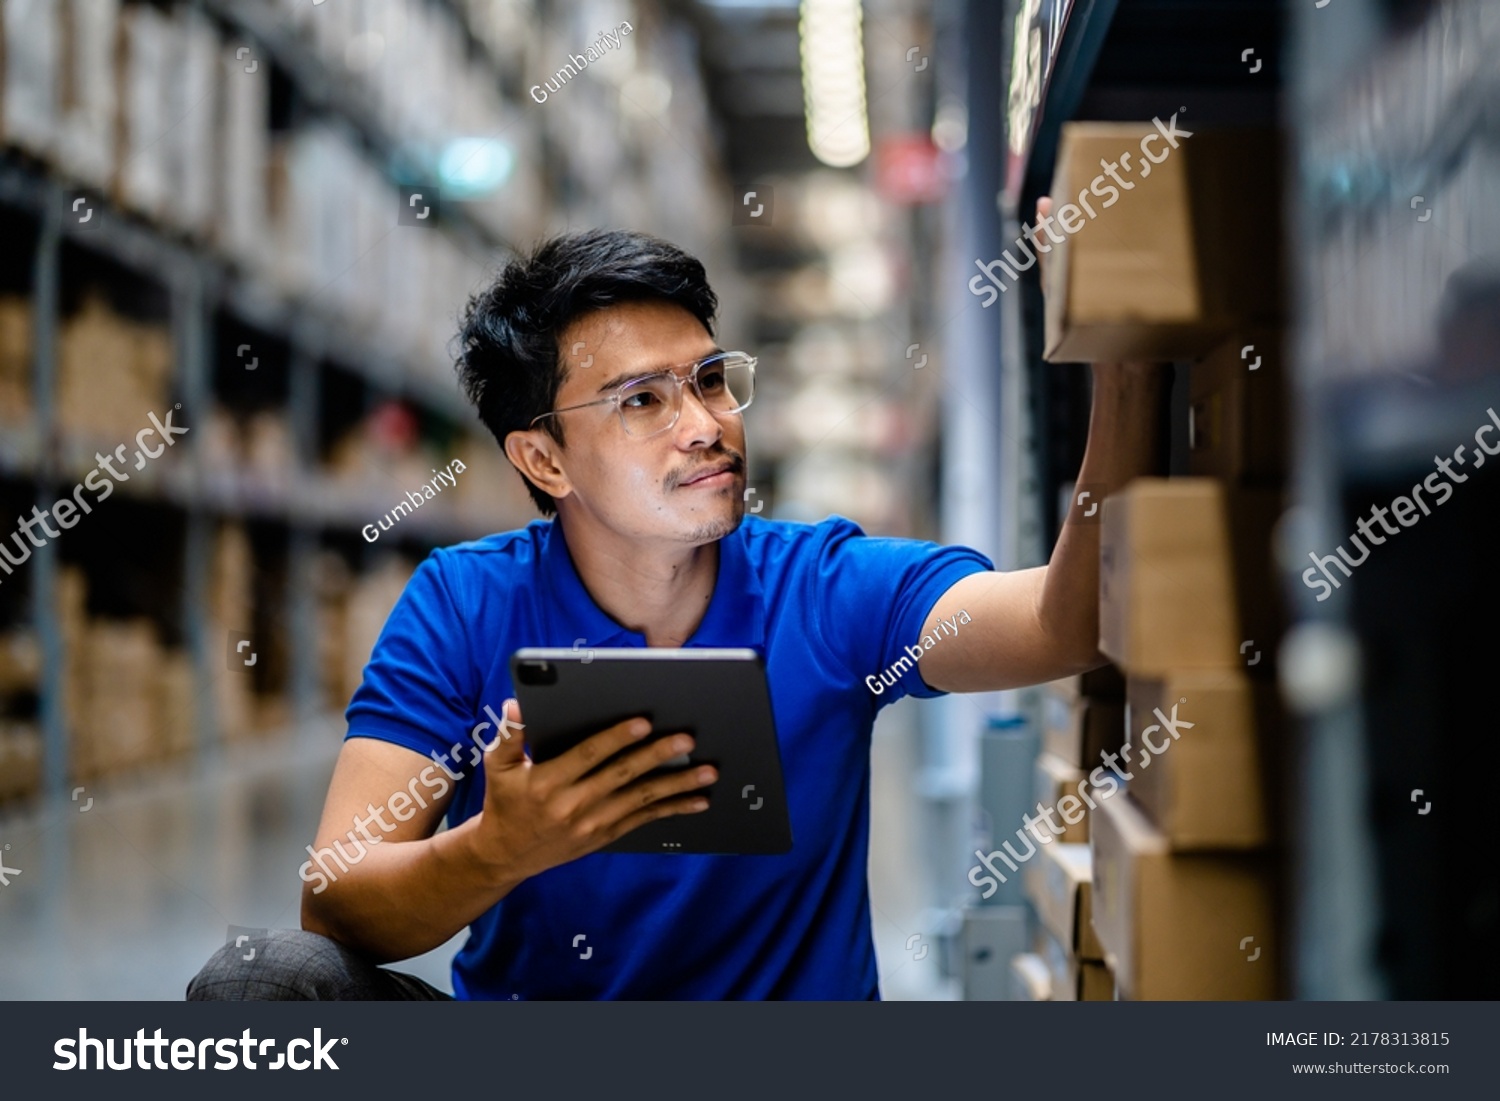 Warehouse Worker in safety suite using digital tablets to check the stock inventory in large warehouses, a Smart warehouse management system, supply chain and logistic network technology concept. #2178313815